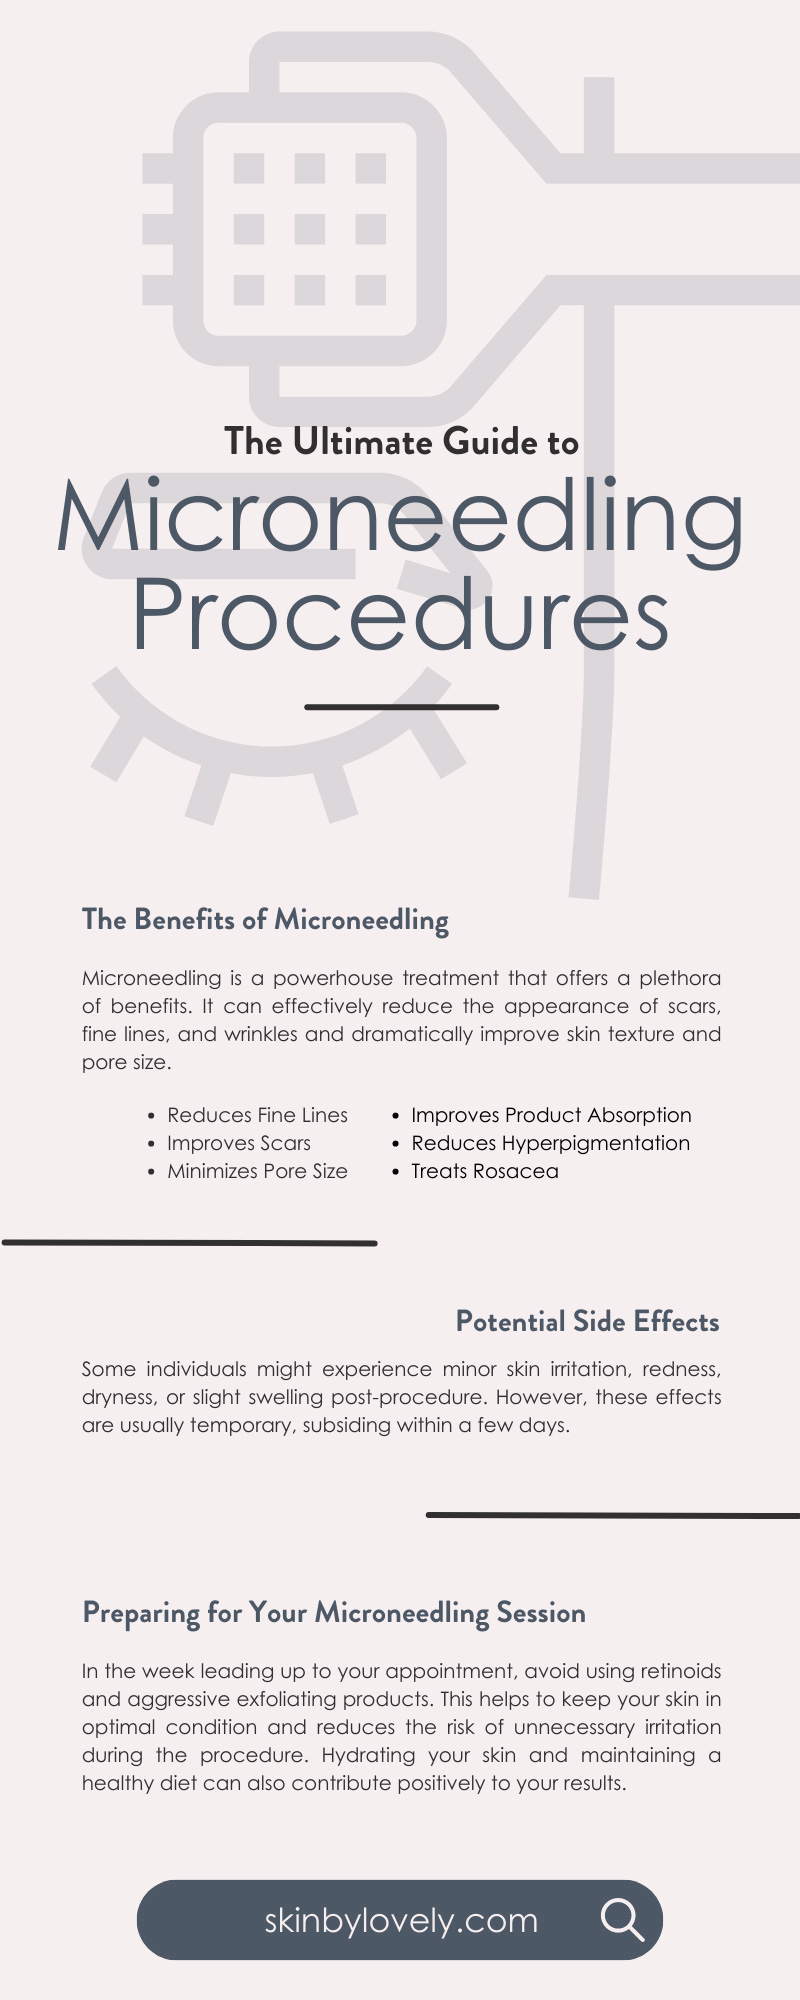 The Ultimate Guide to Microneedling Procedures